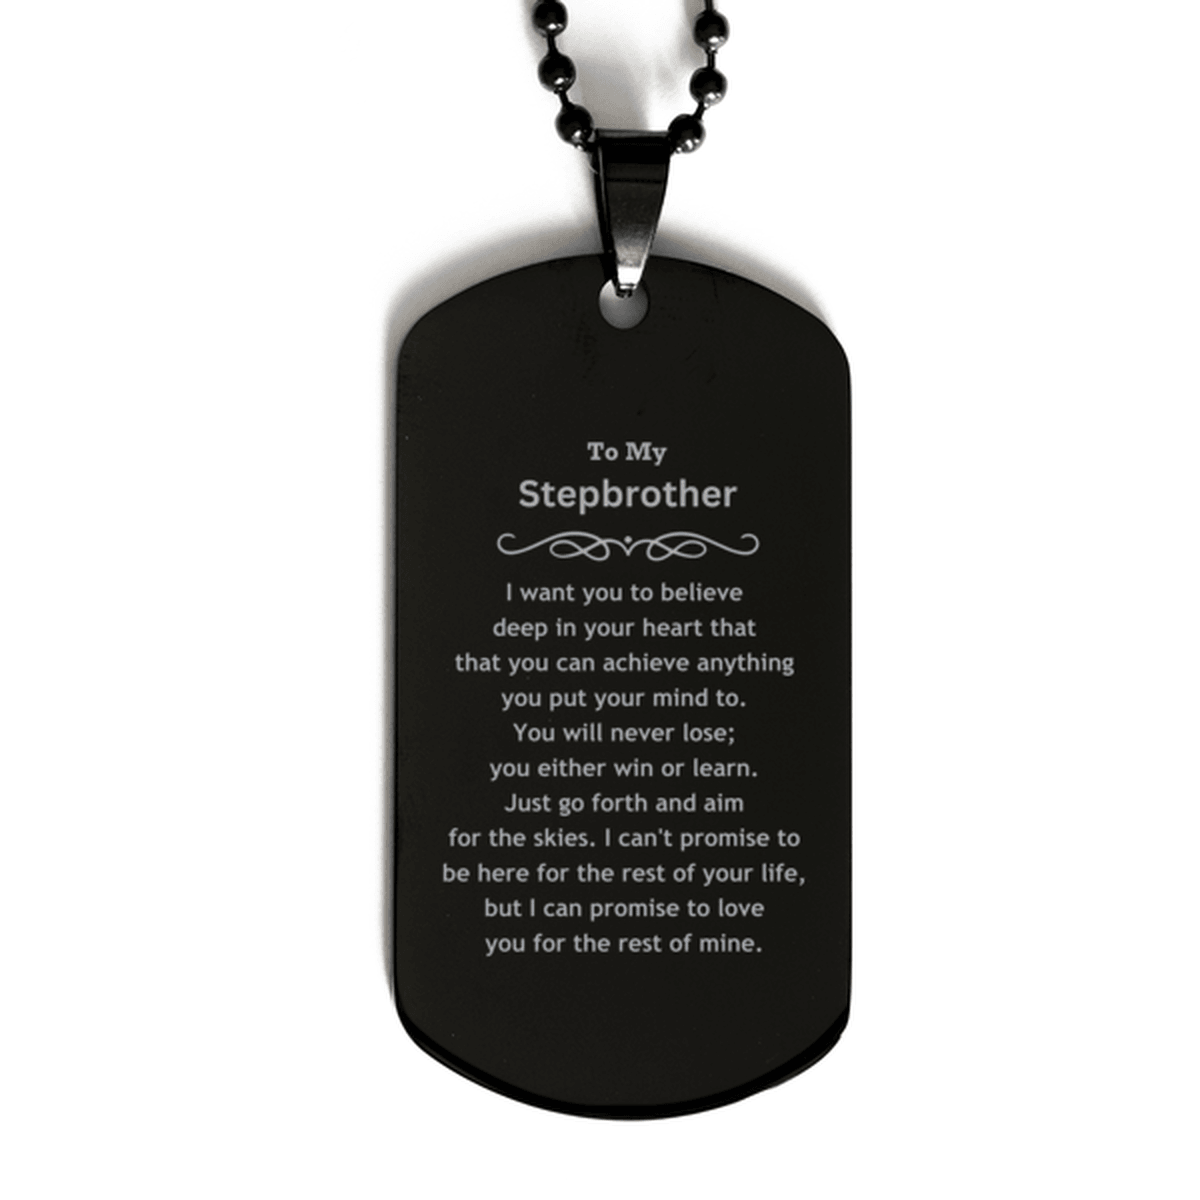 Motivational Stepbrother Black Dog Tag Necklace - I can promise to love you for the rest of mine, Birthday Christmas Jewelry Gift for Men - Mallard Moon Gift Shop